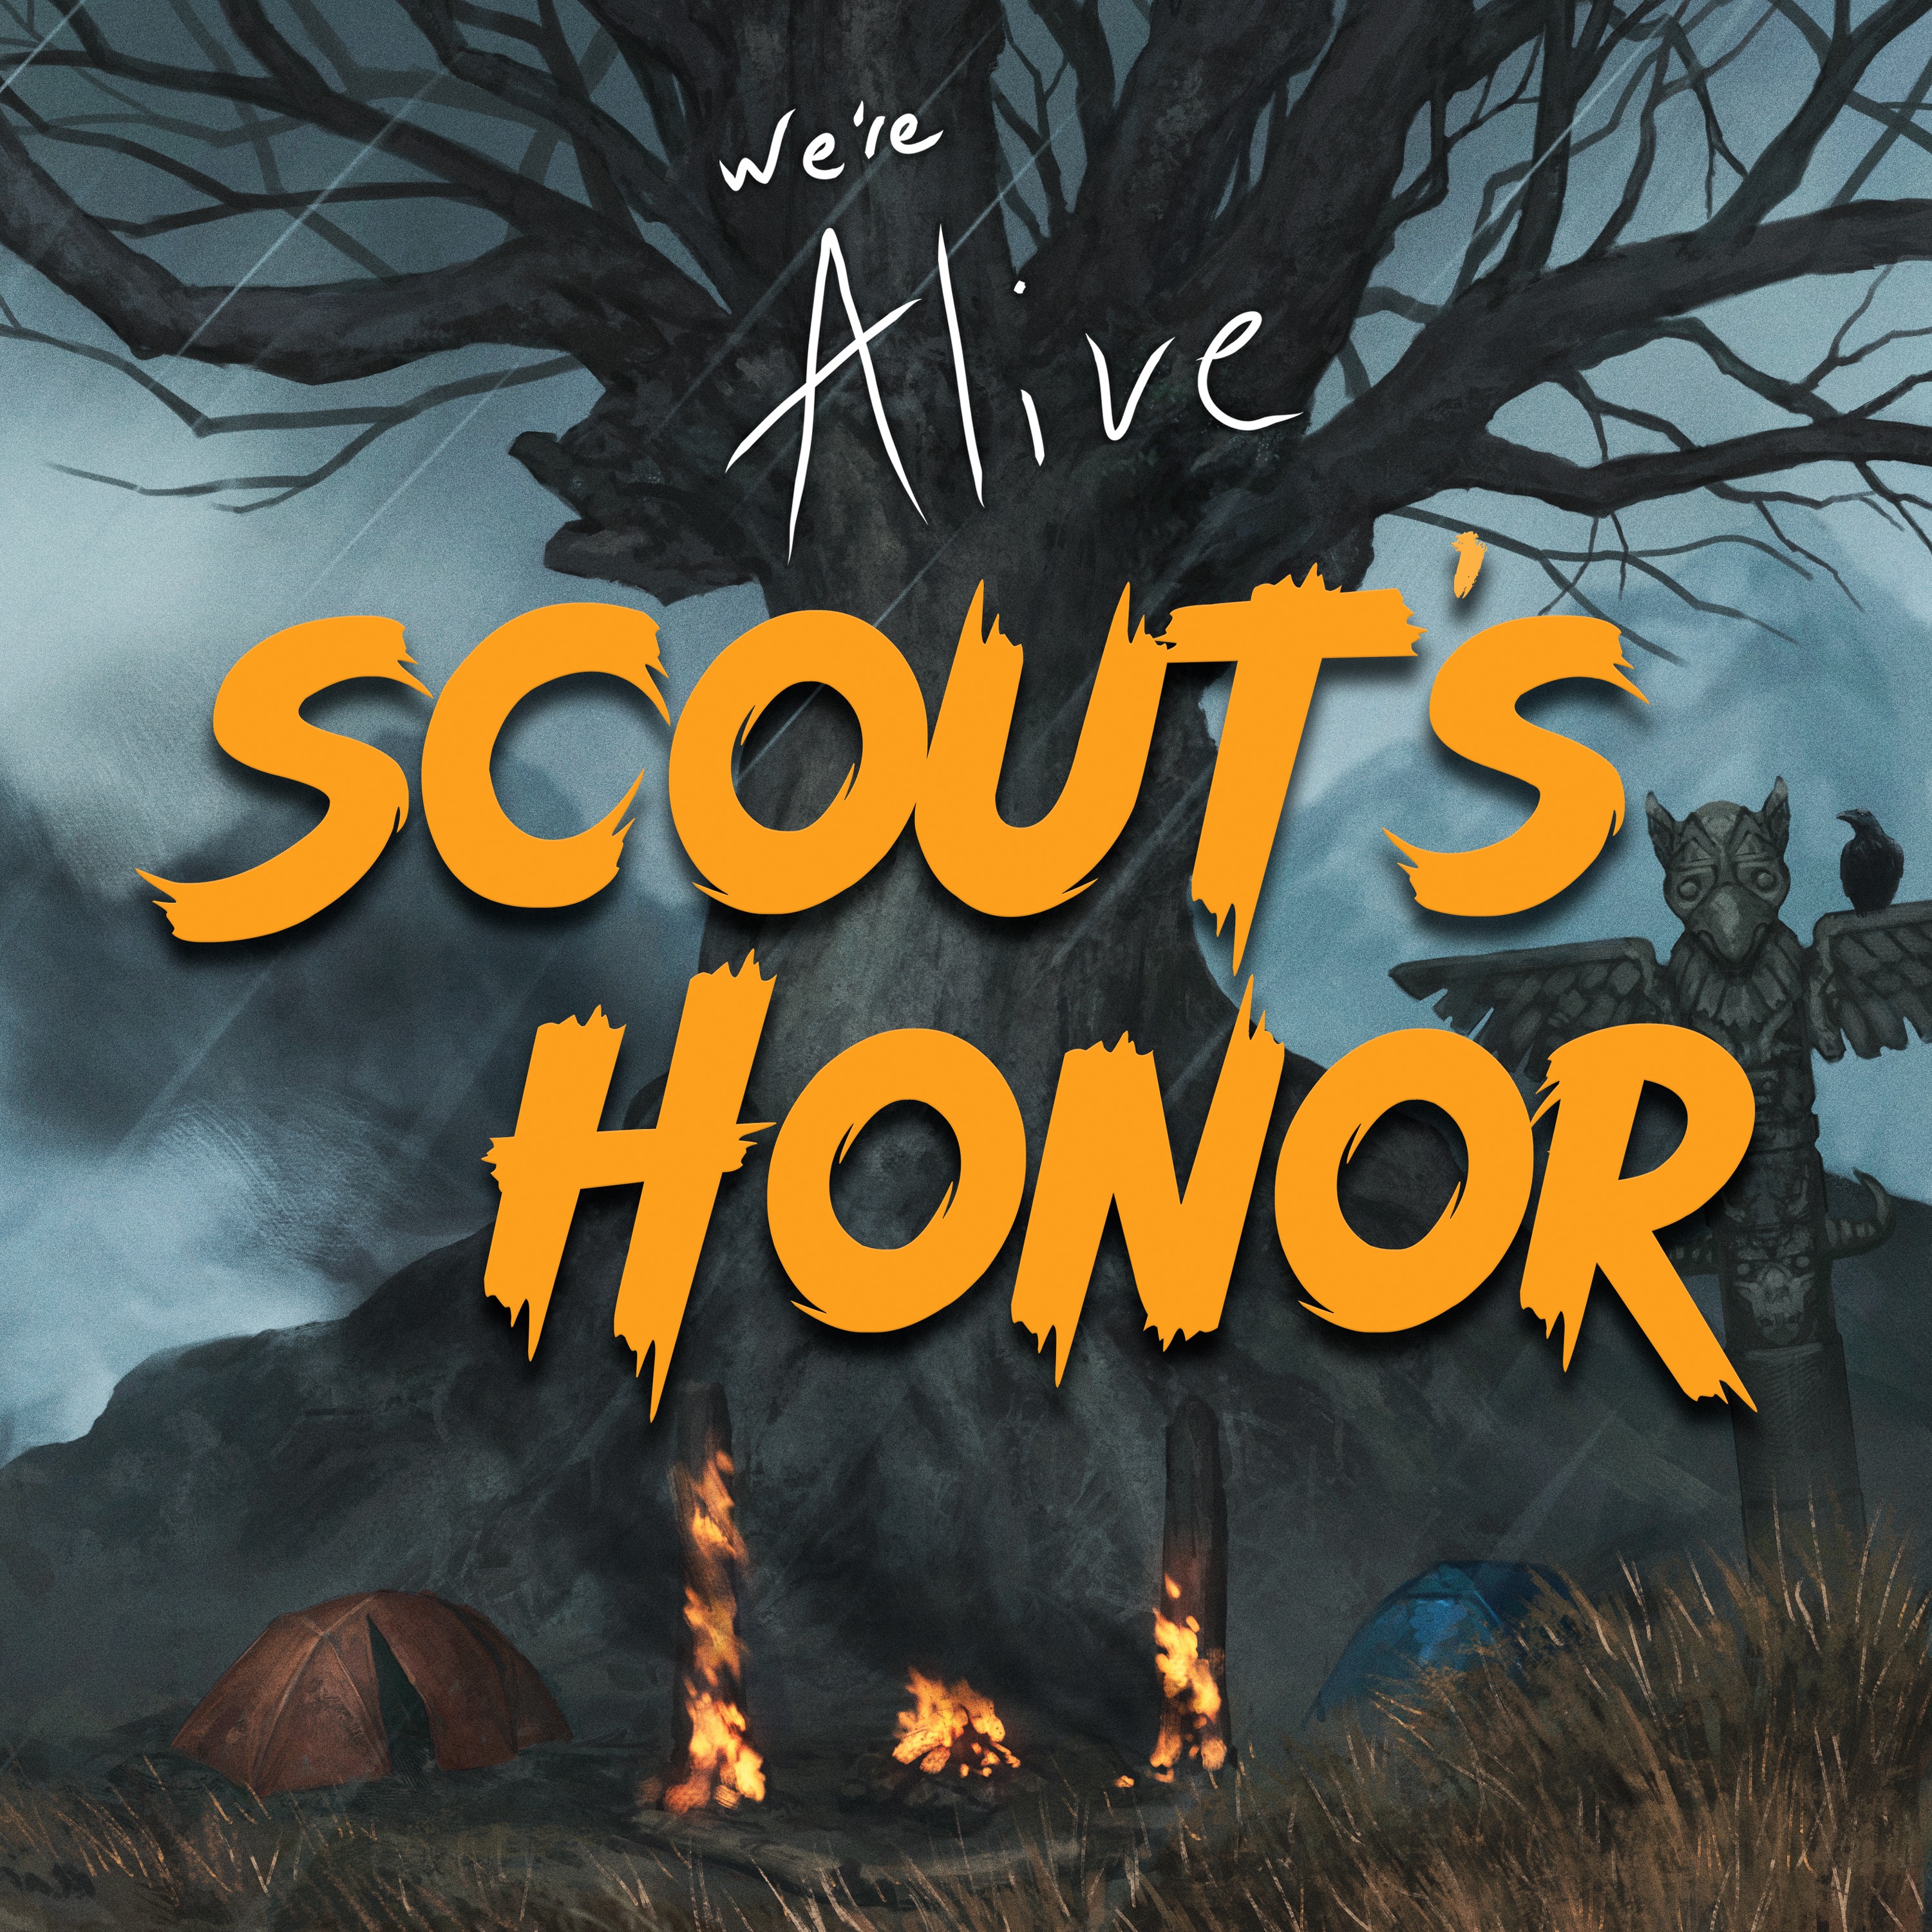 We’re Alive: Scout’s Honor - Chapter 7 - Unraveling the Trail